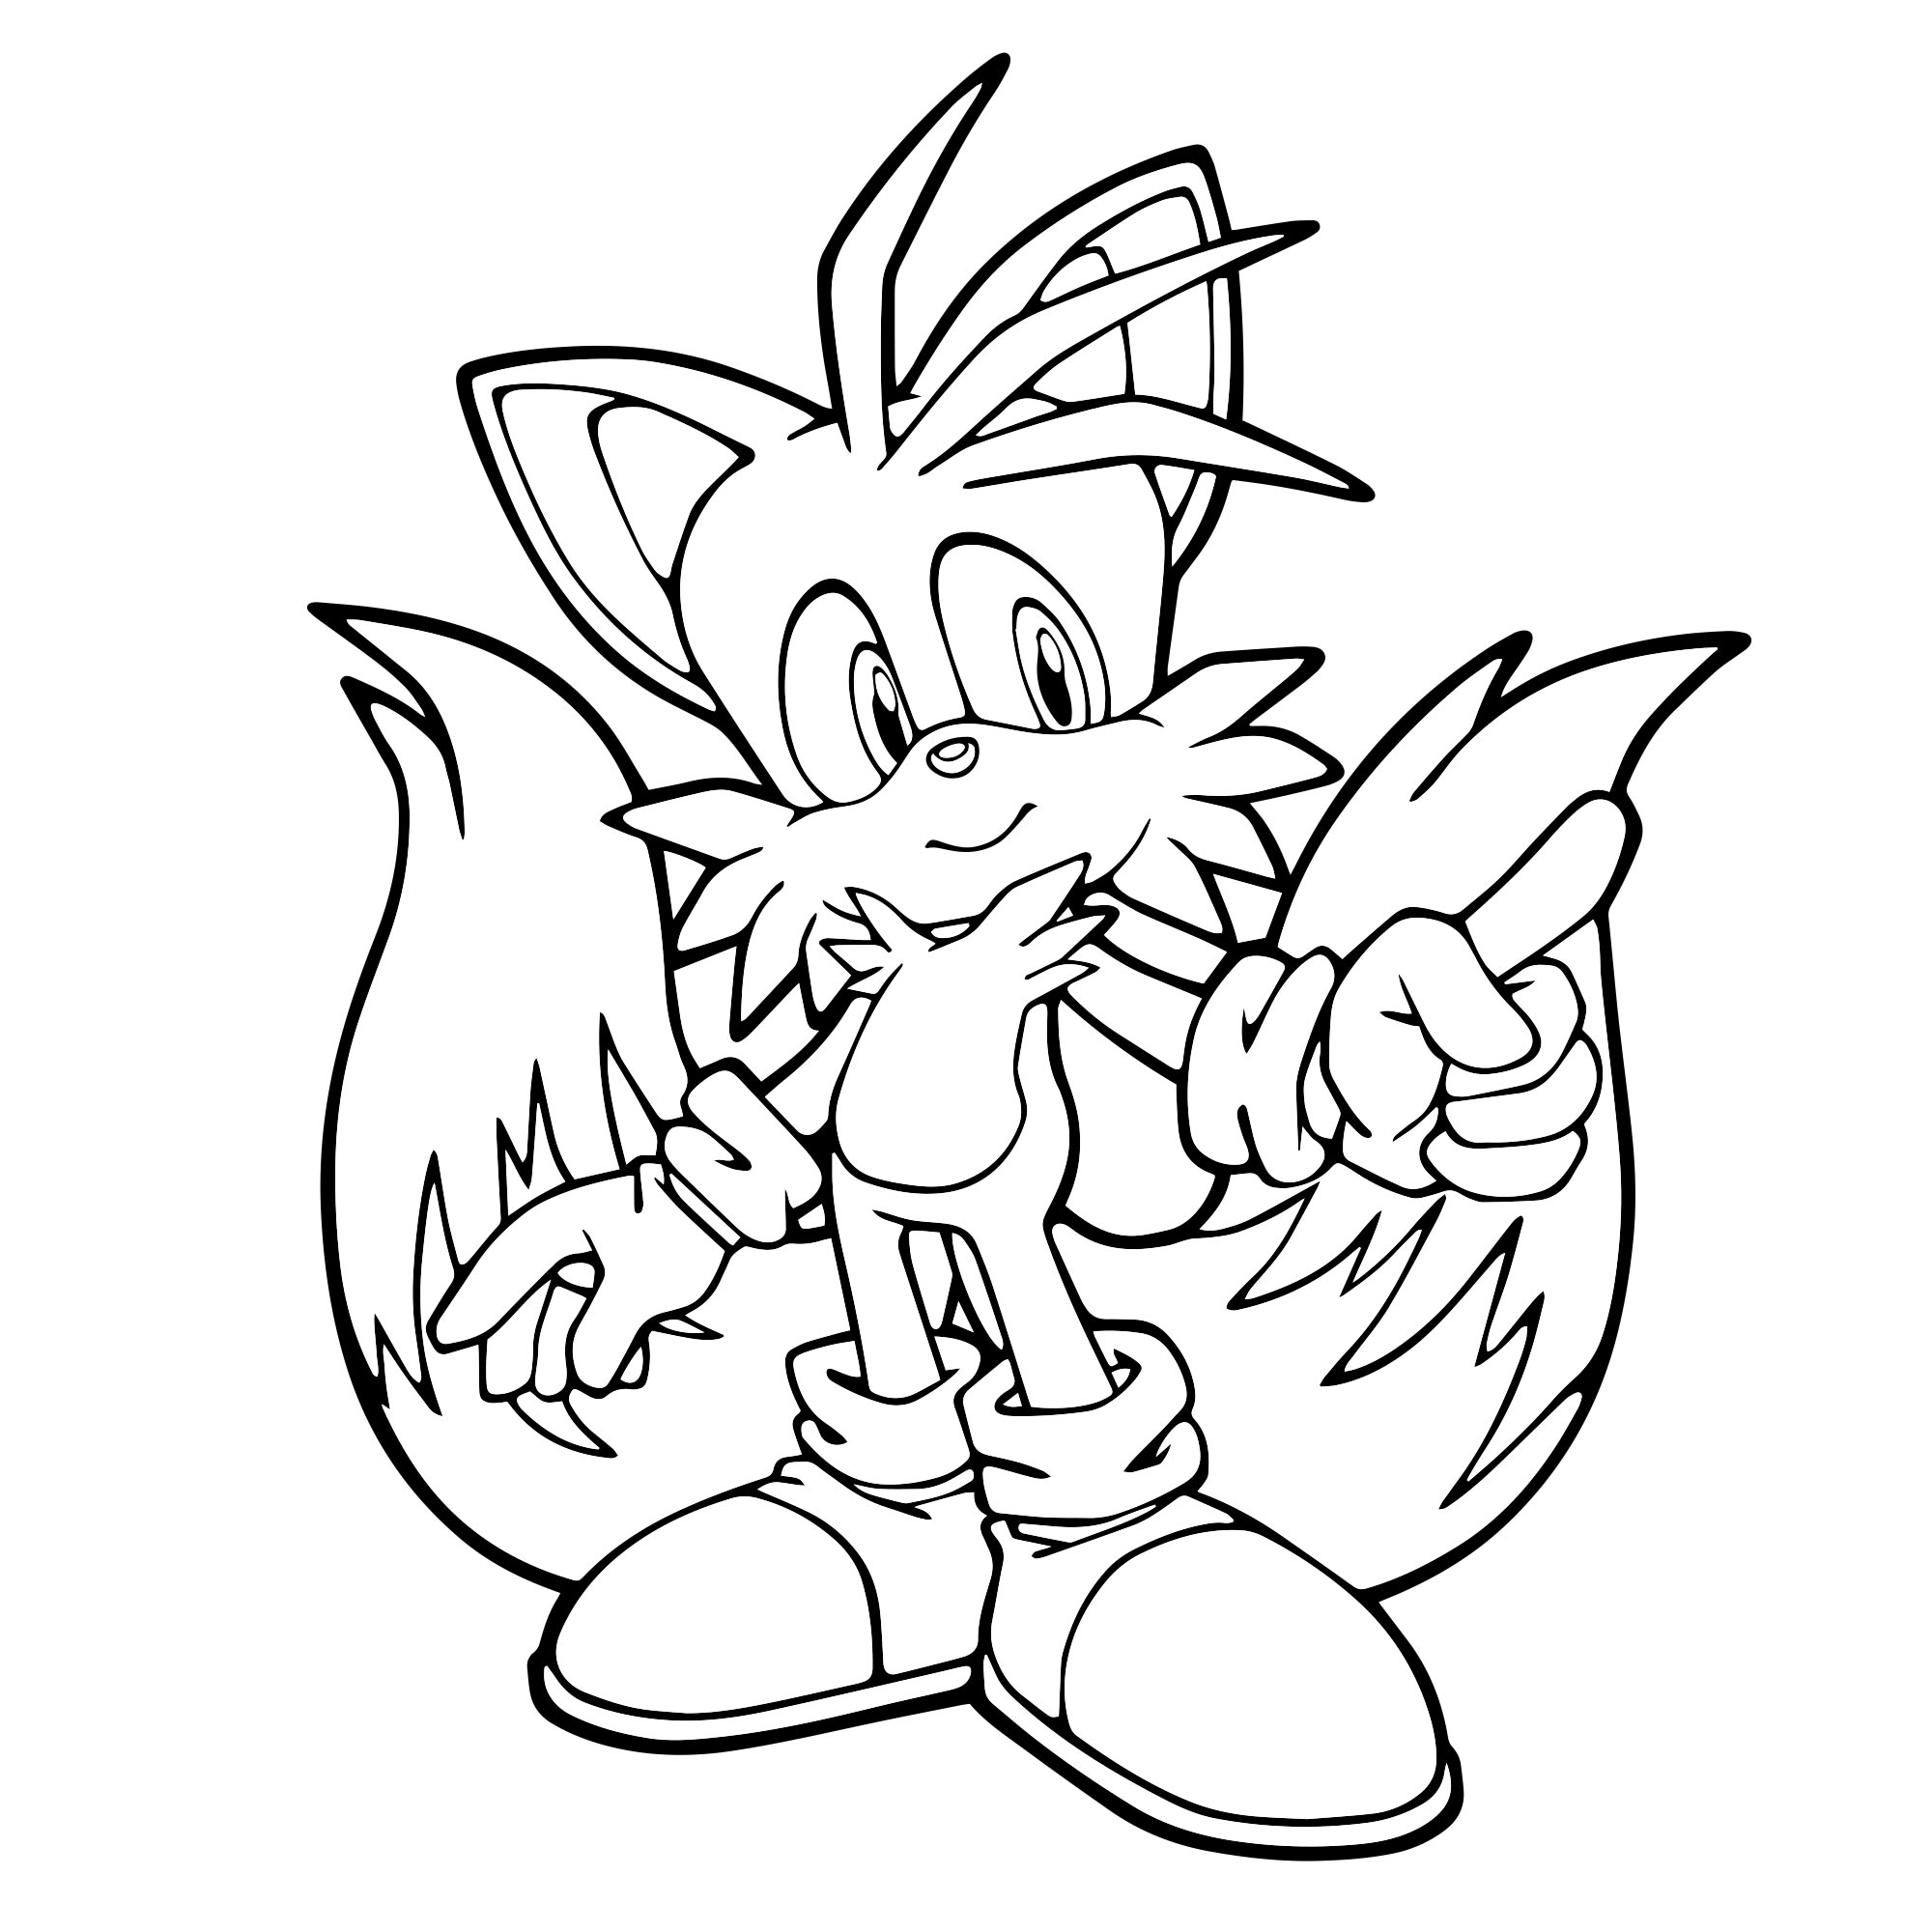 Majestic tails coloring page